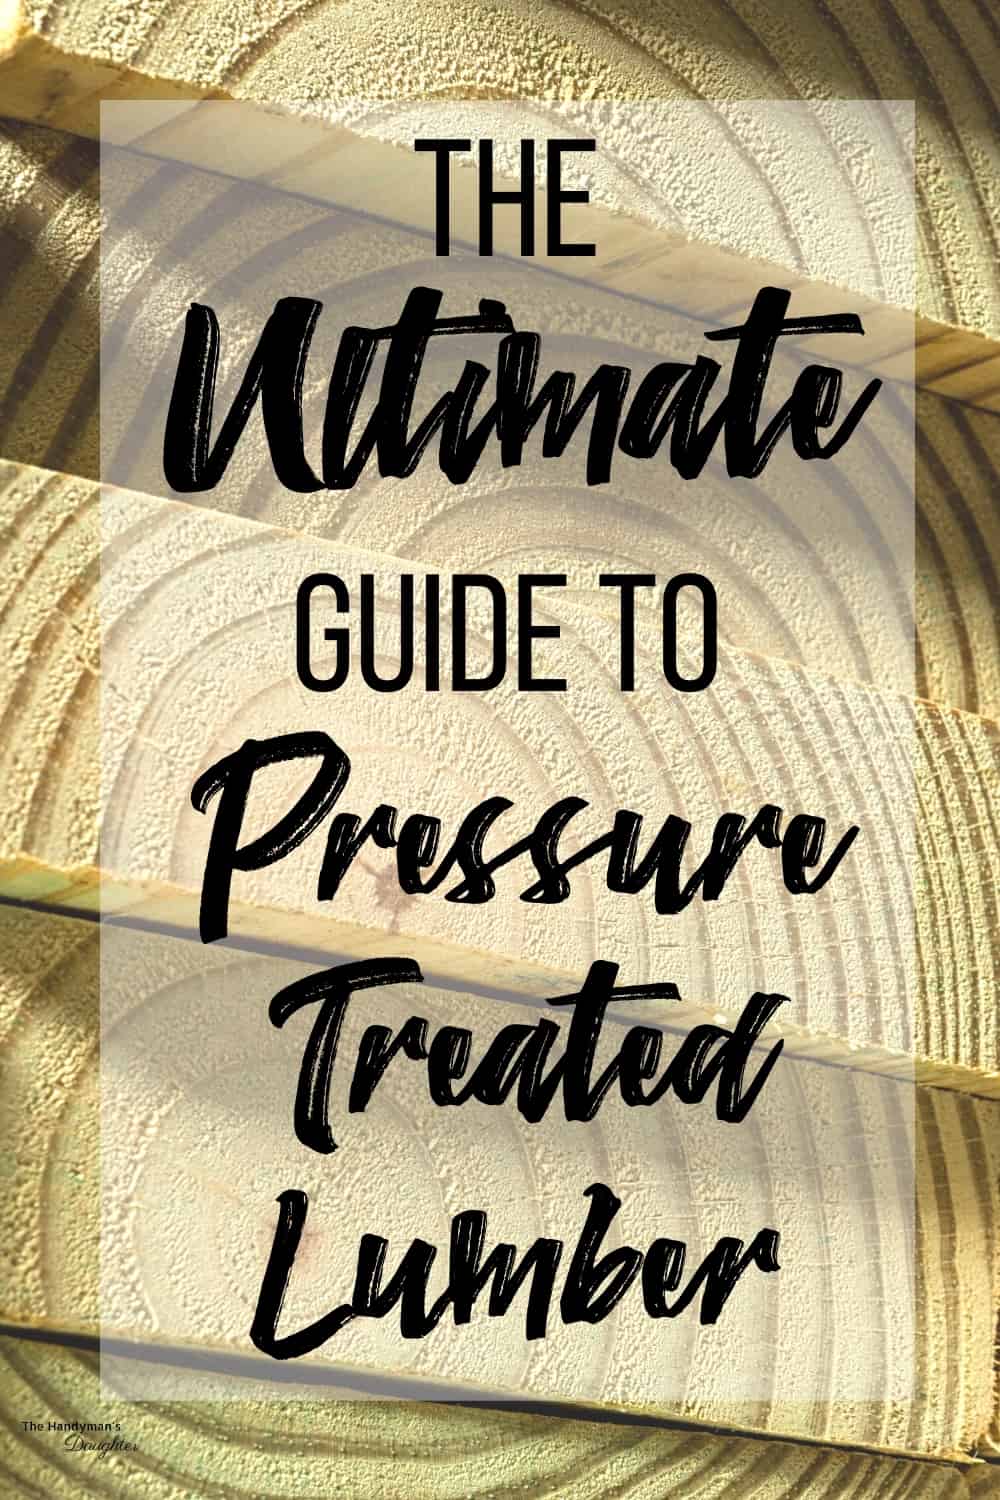 guide to pressure treated lumber